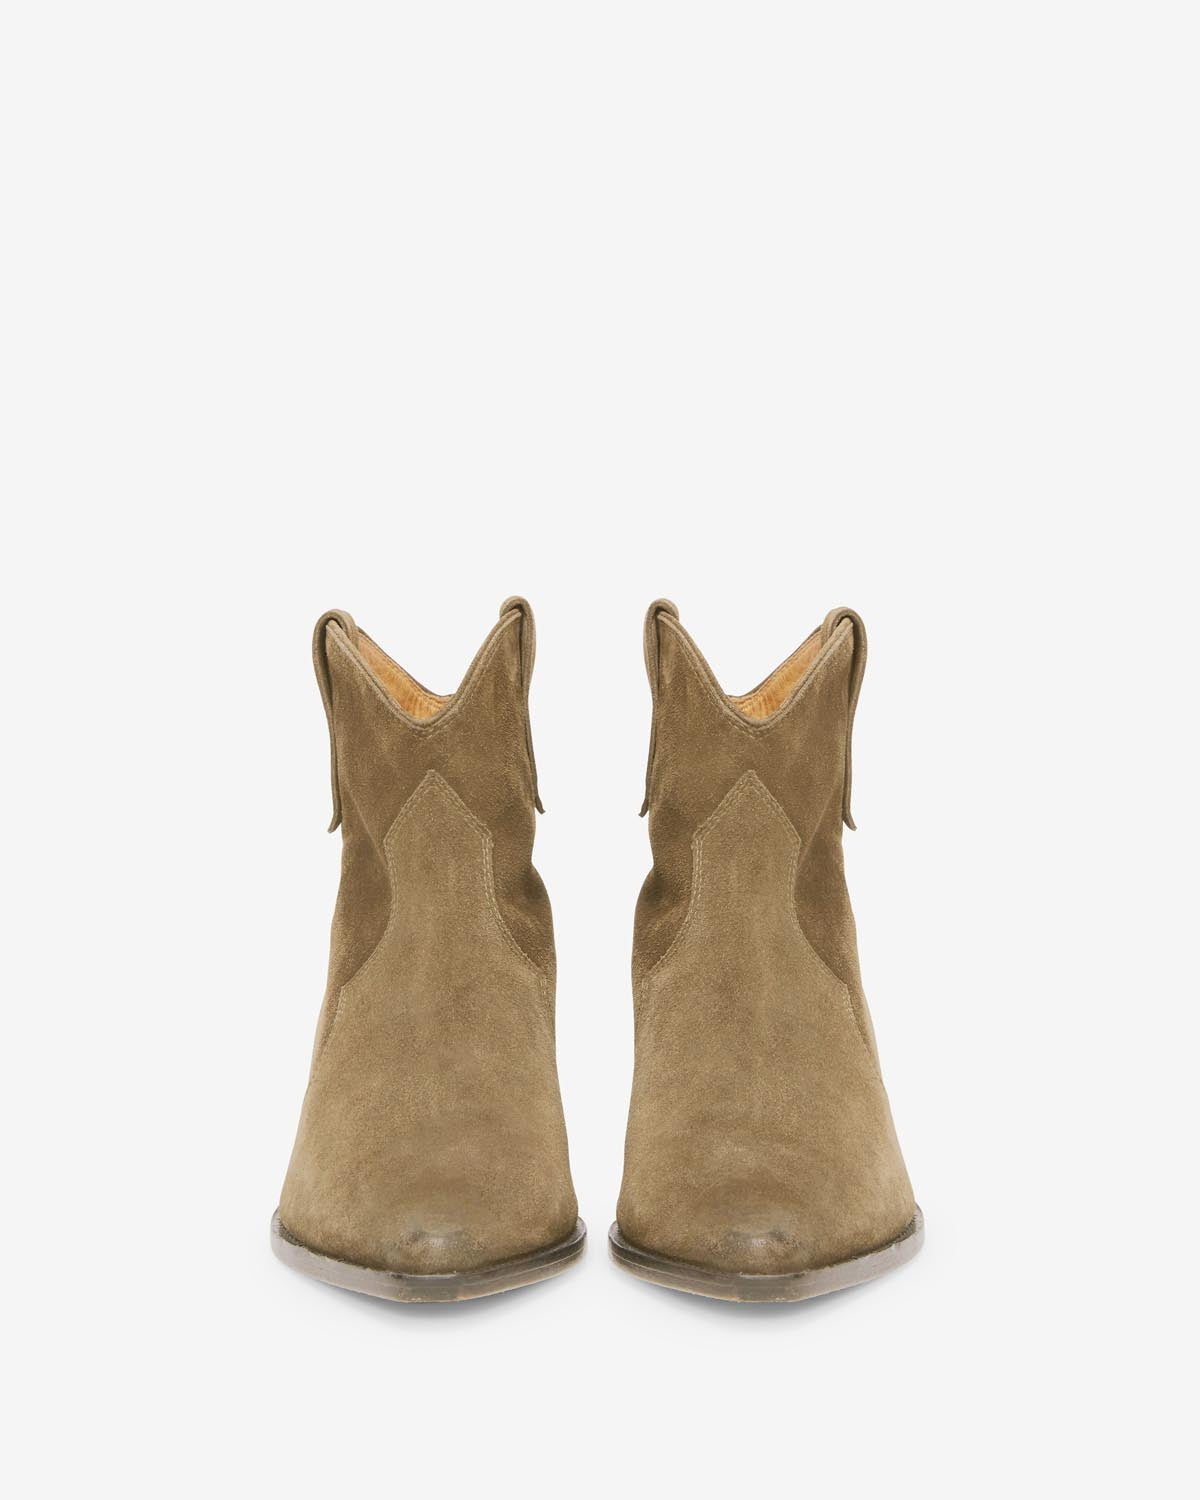 Dewina cowboy boots Woman Taupe 4